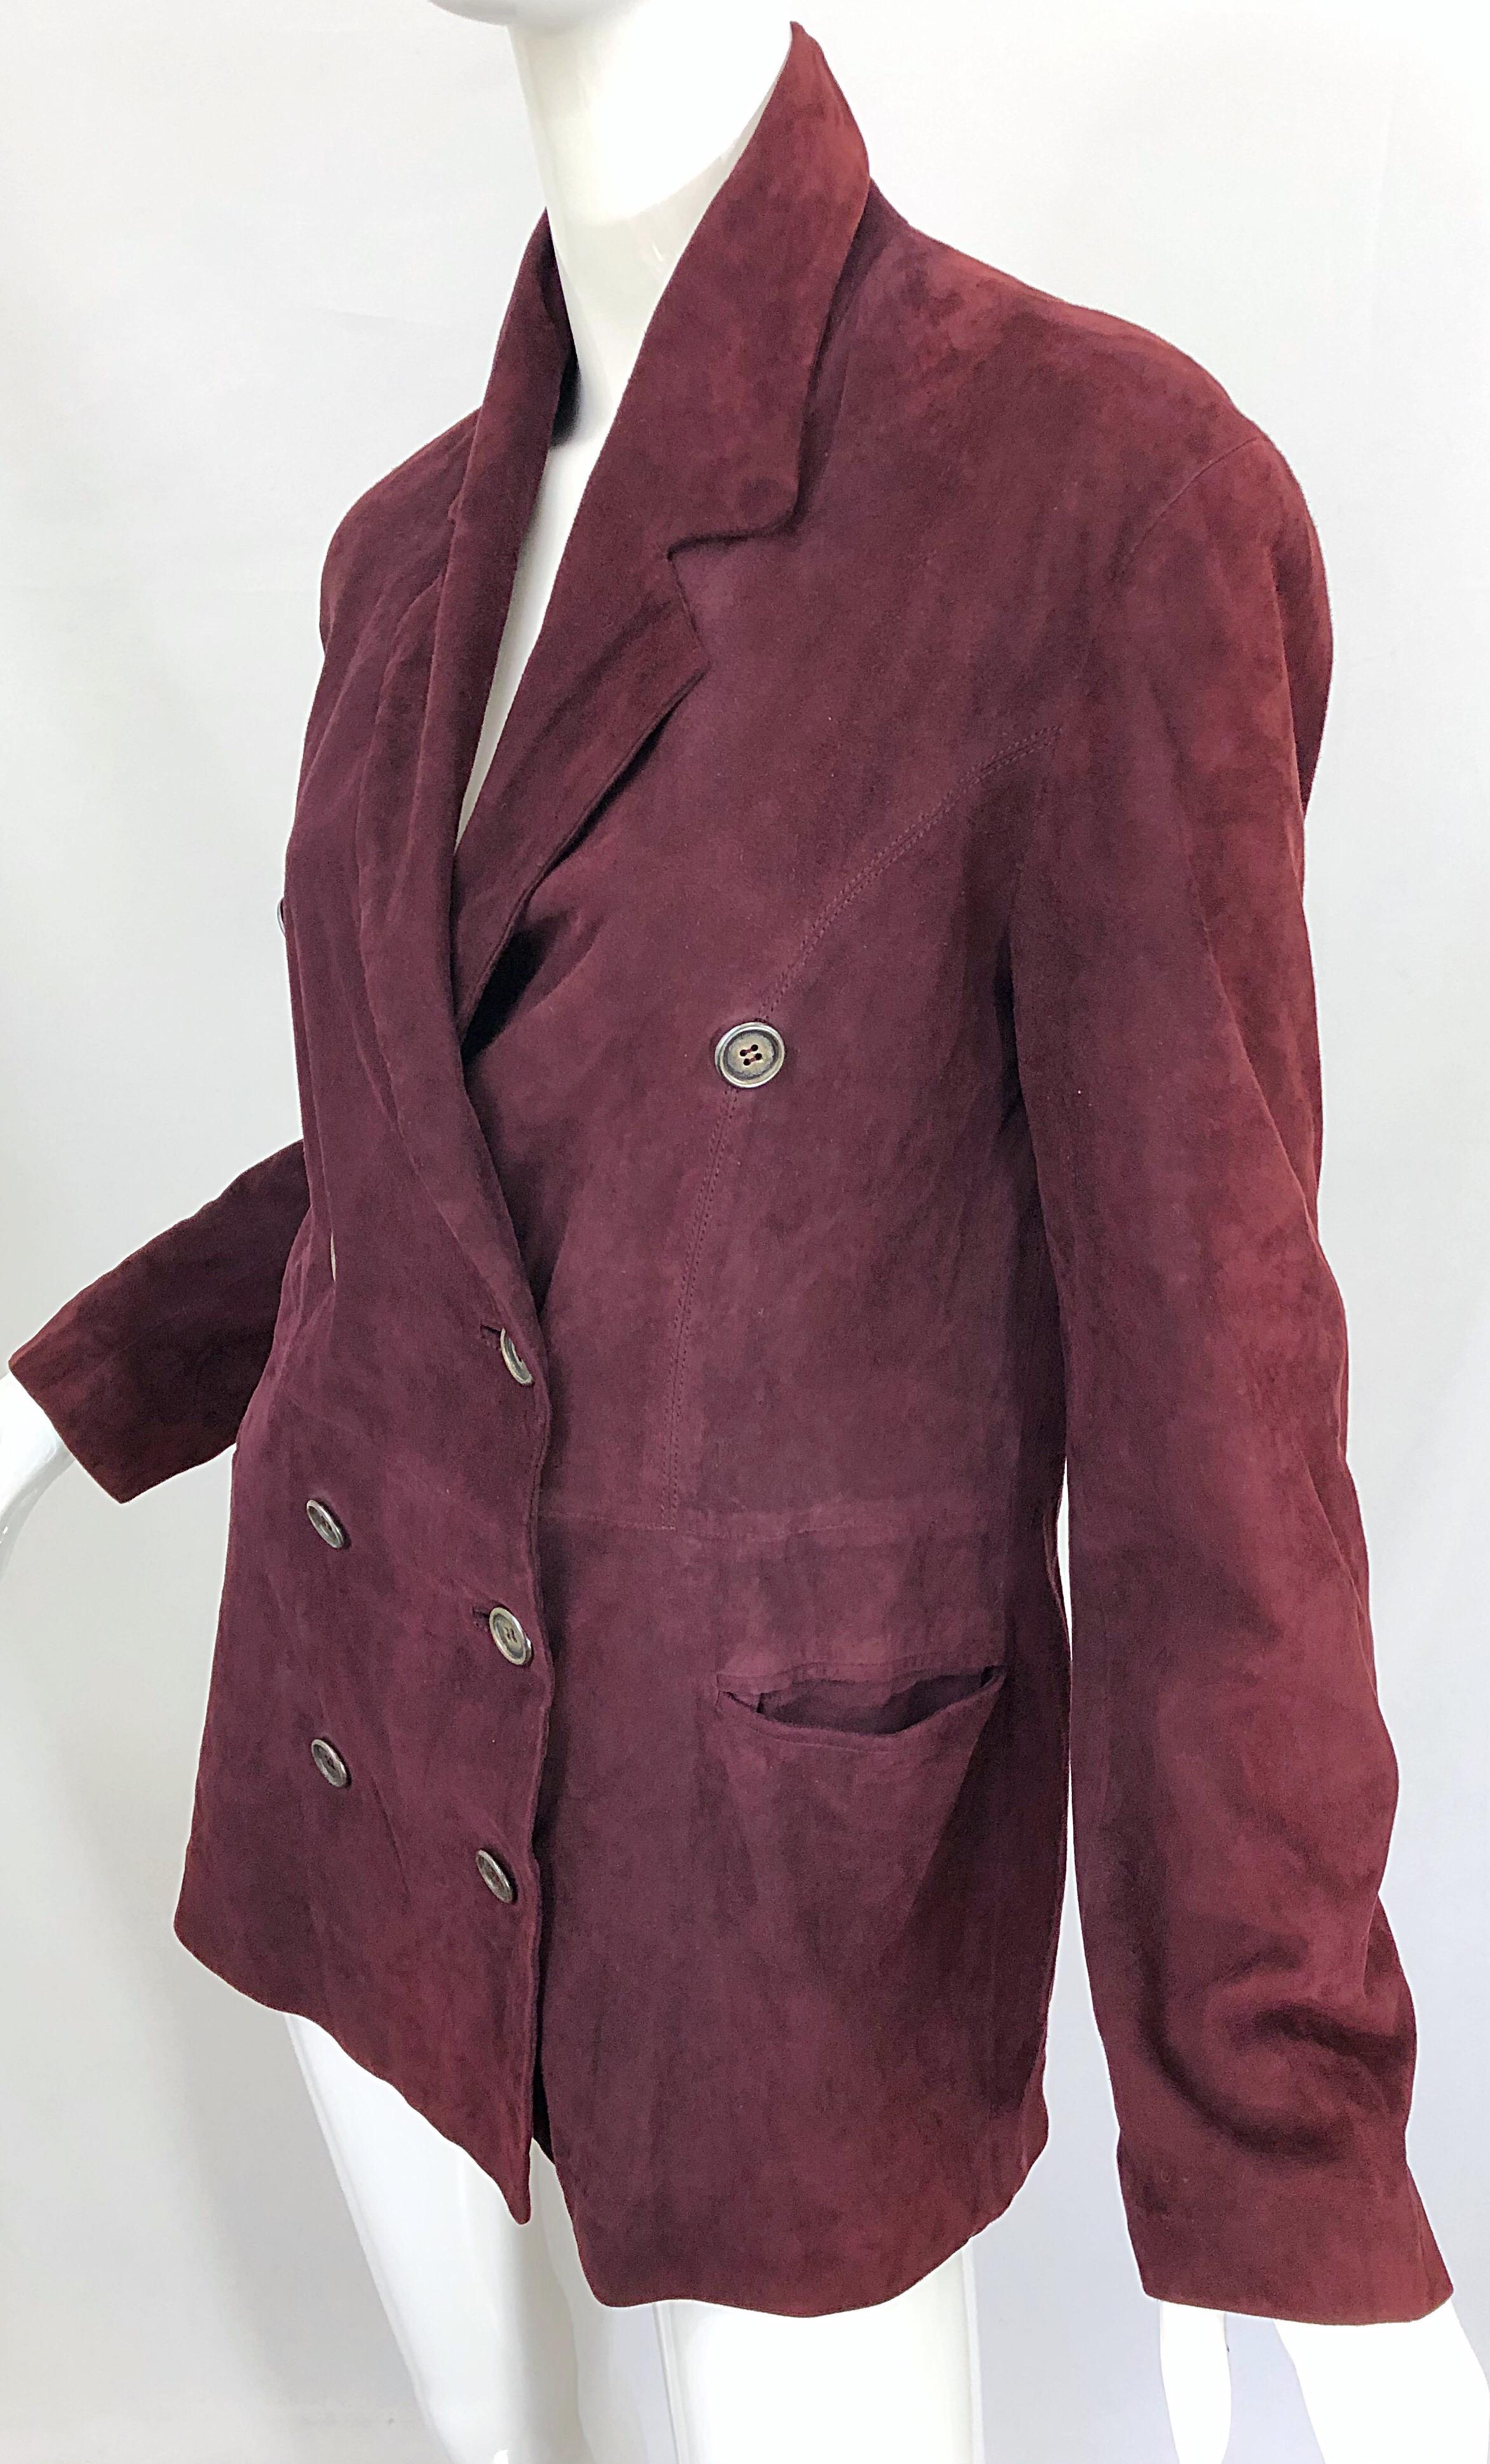 Ozbek 1990s Suede Leather Size 8 Burgundy Maroon Double Breasted Blazer Jacket For Sale 3